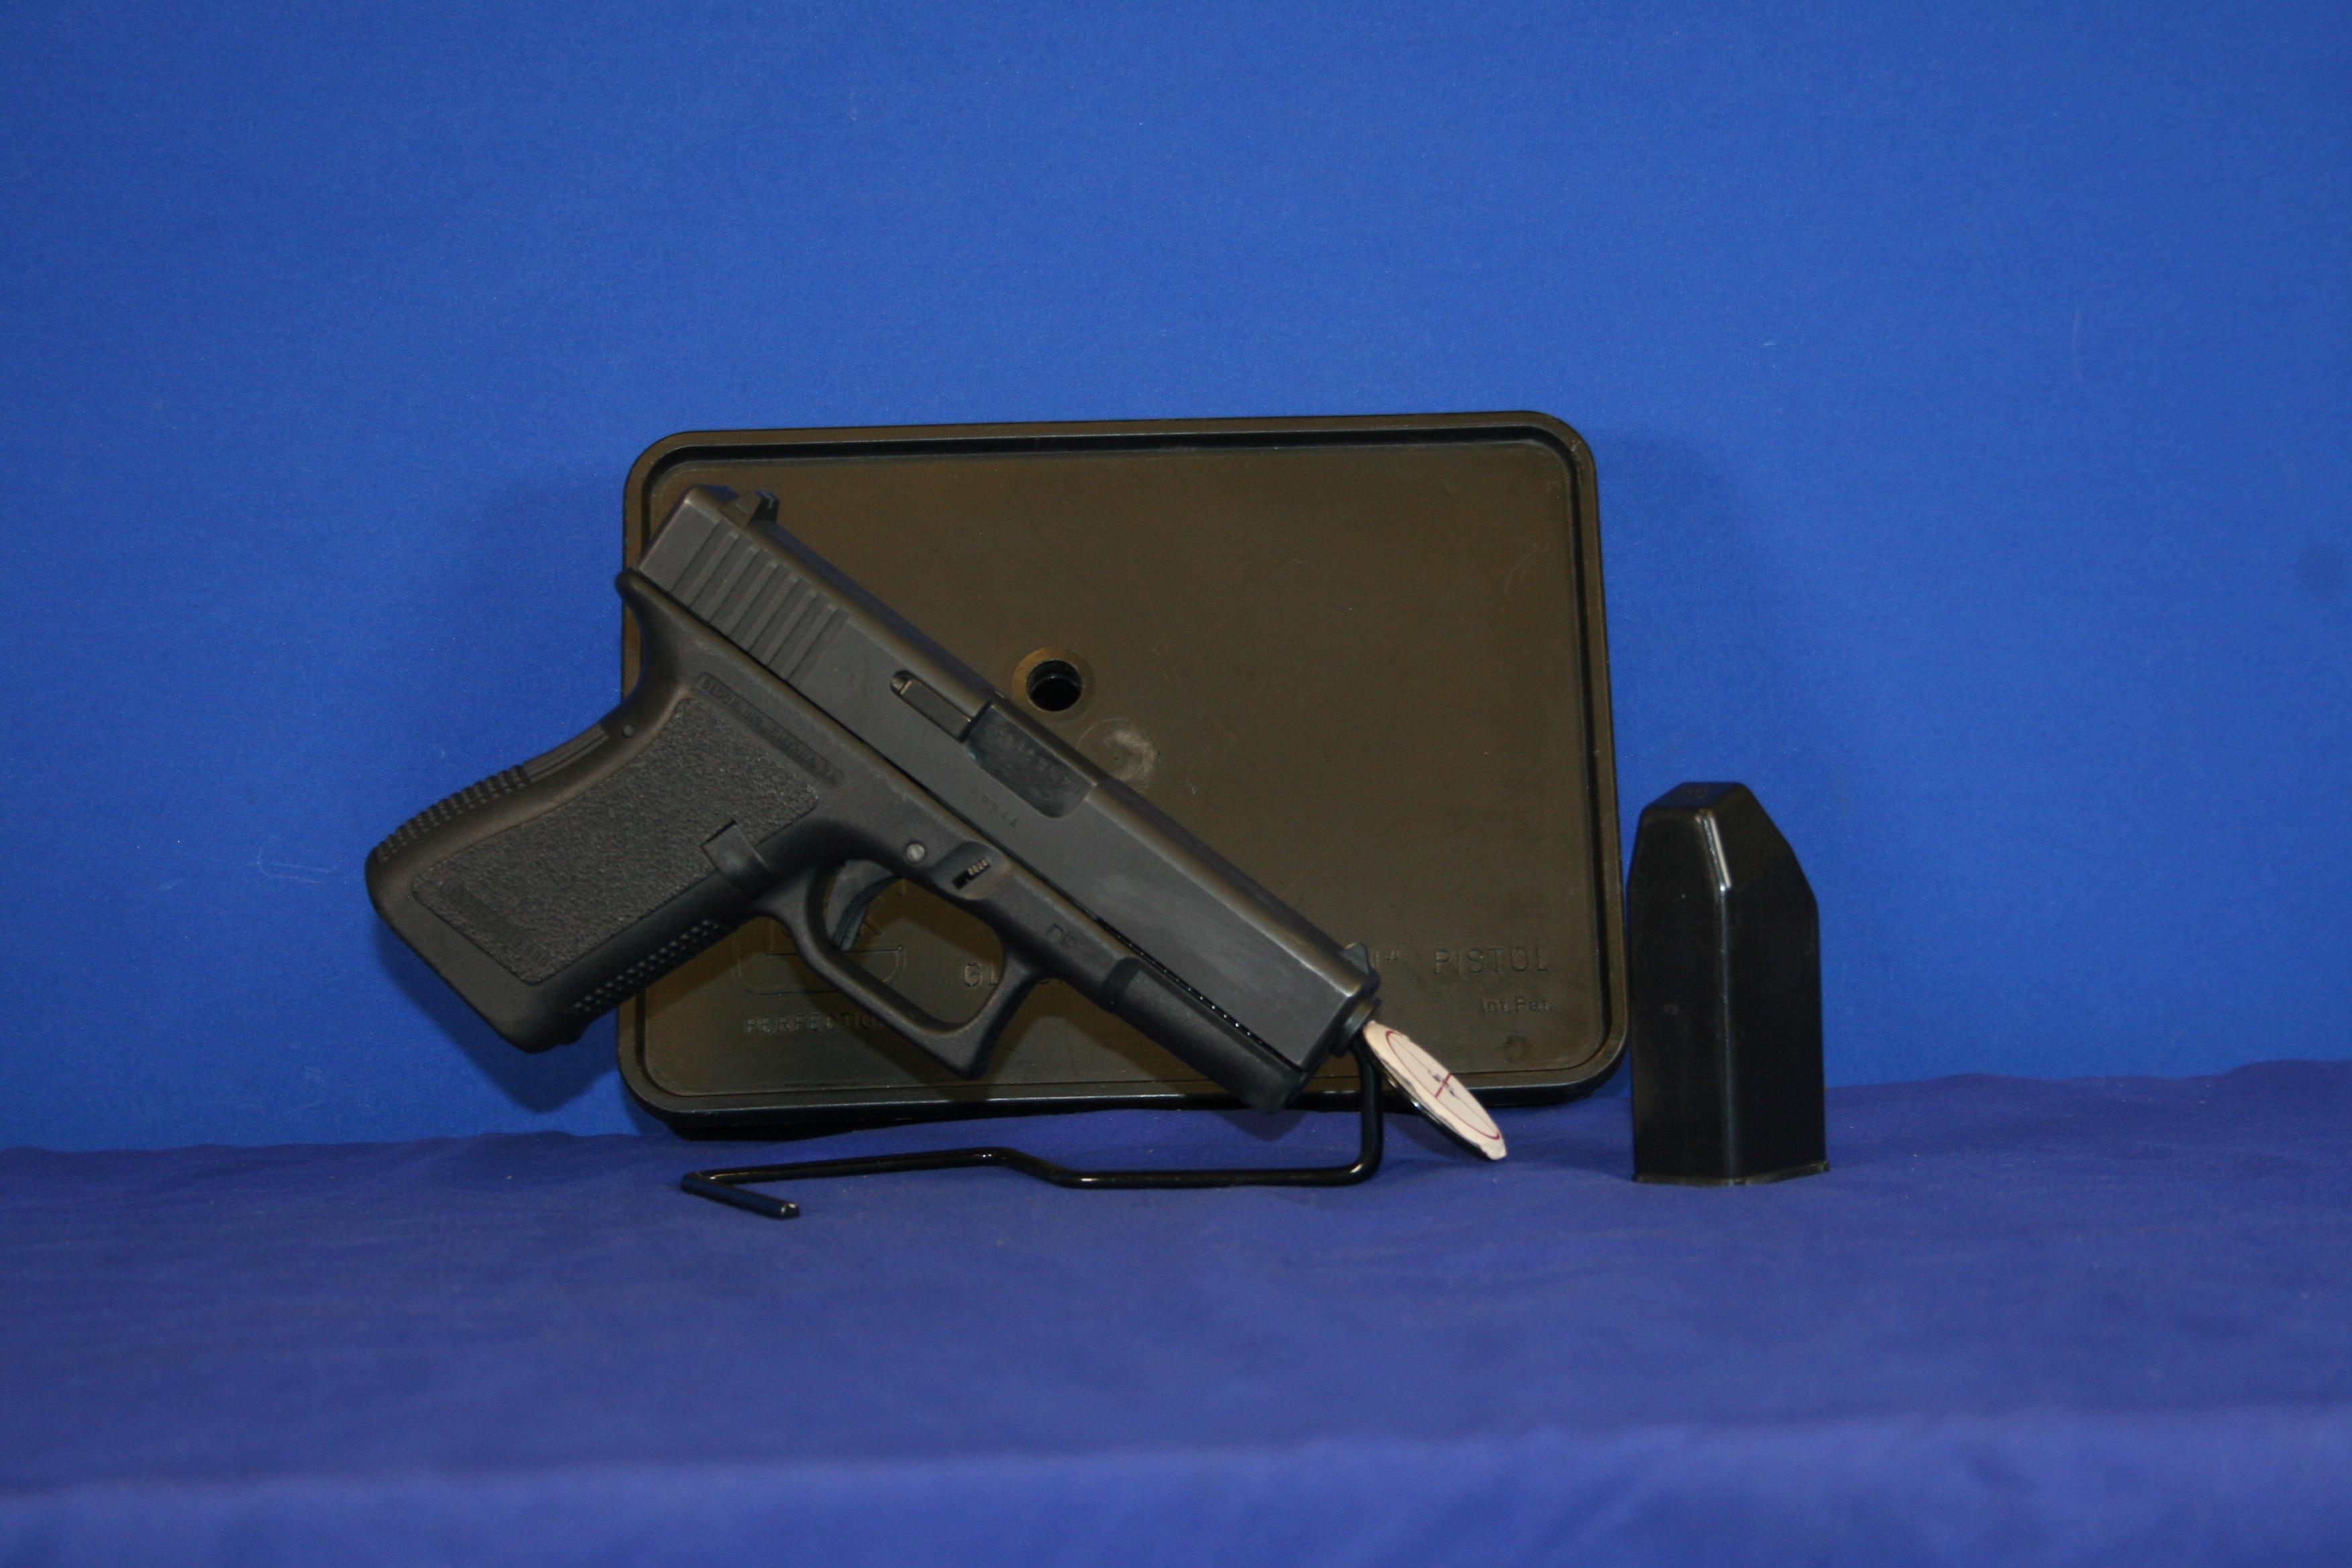 Glock 19 Gen 2 9 mm, 4" Barrel. No Mags. In Good Condition. SN# GP244US. OK for Sale in California.